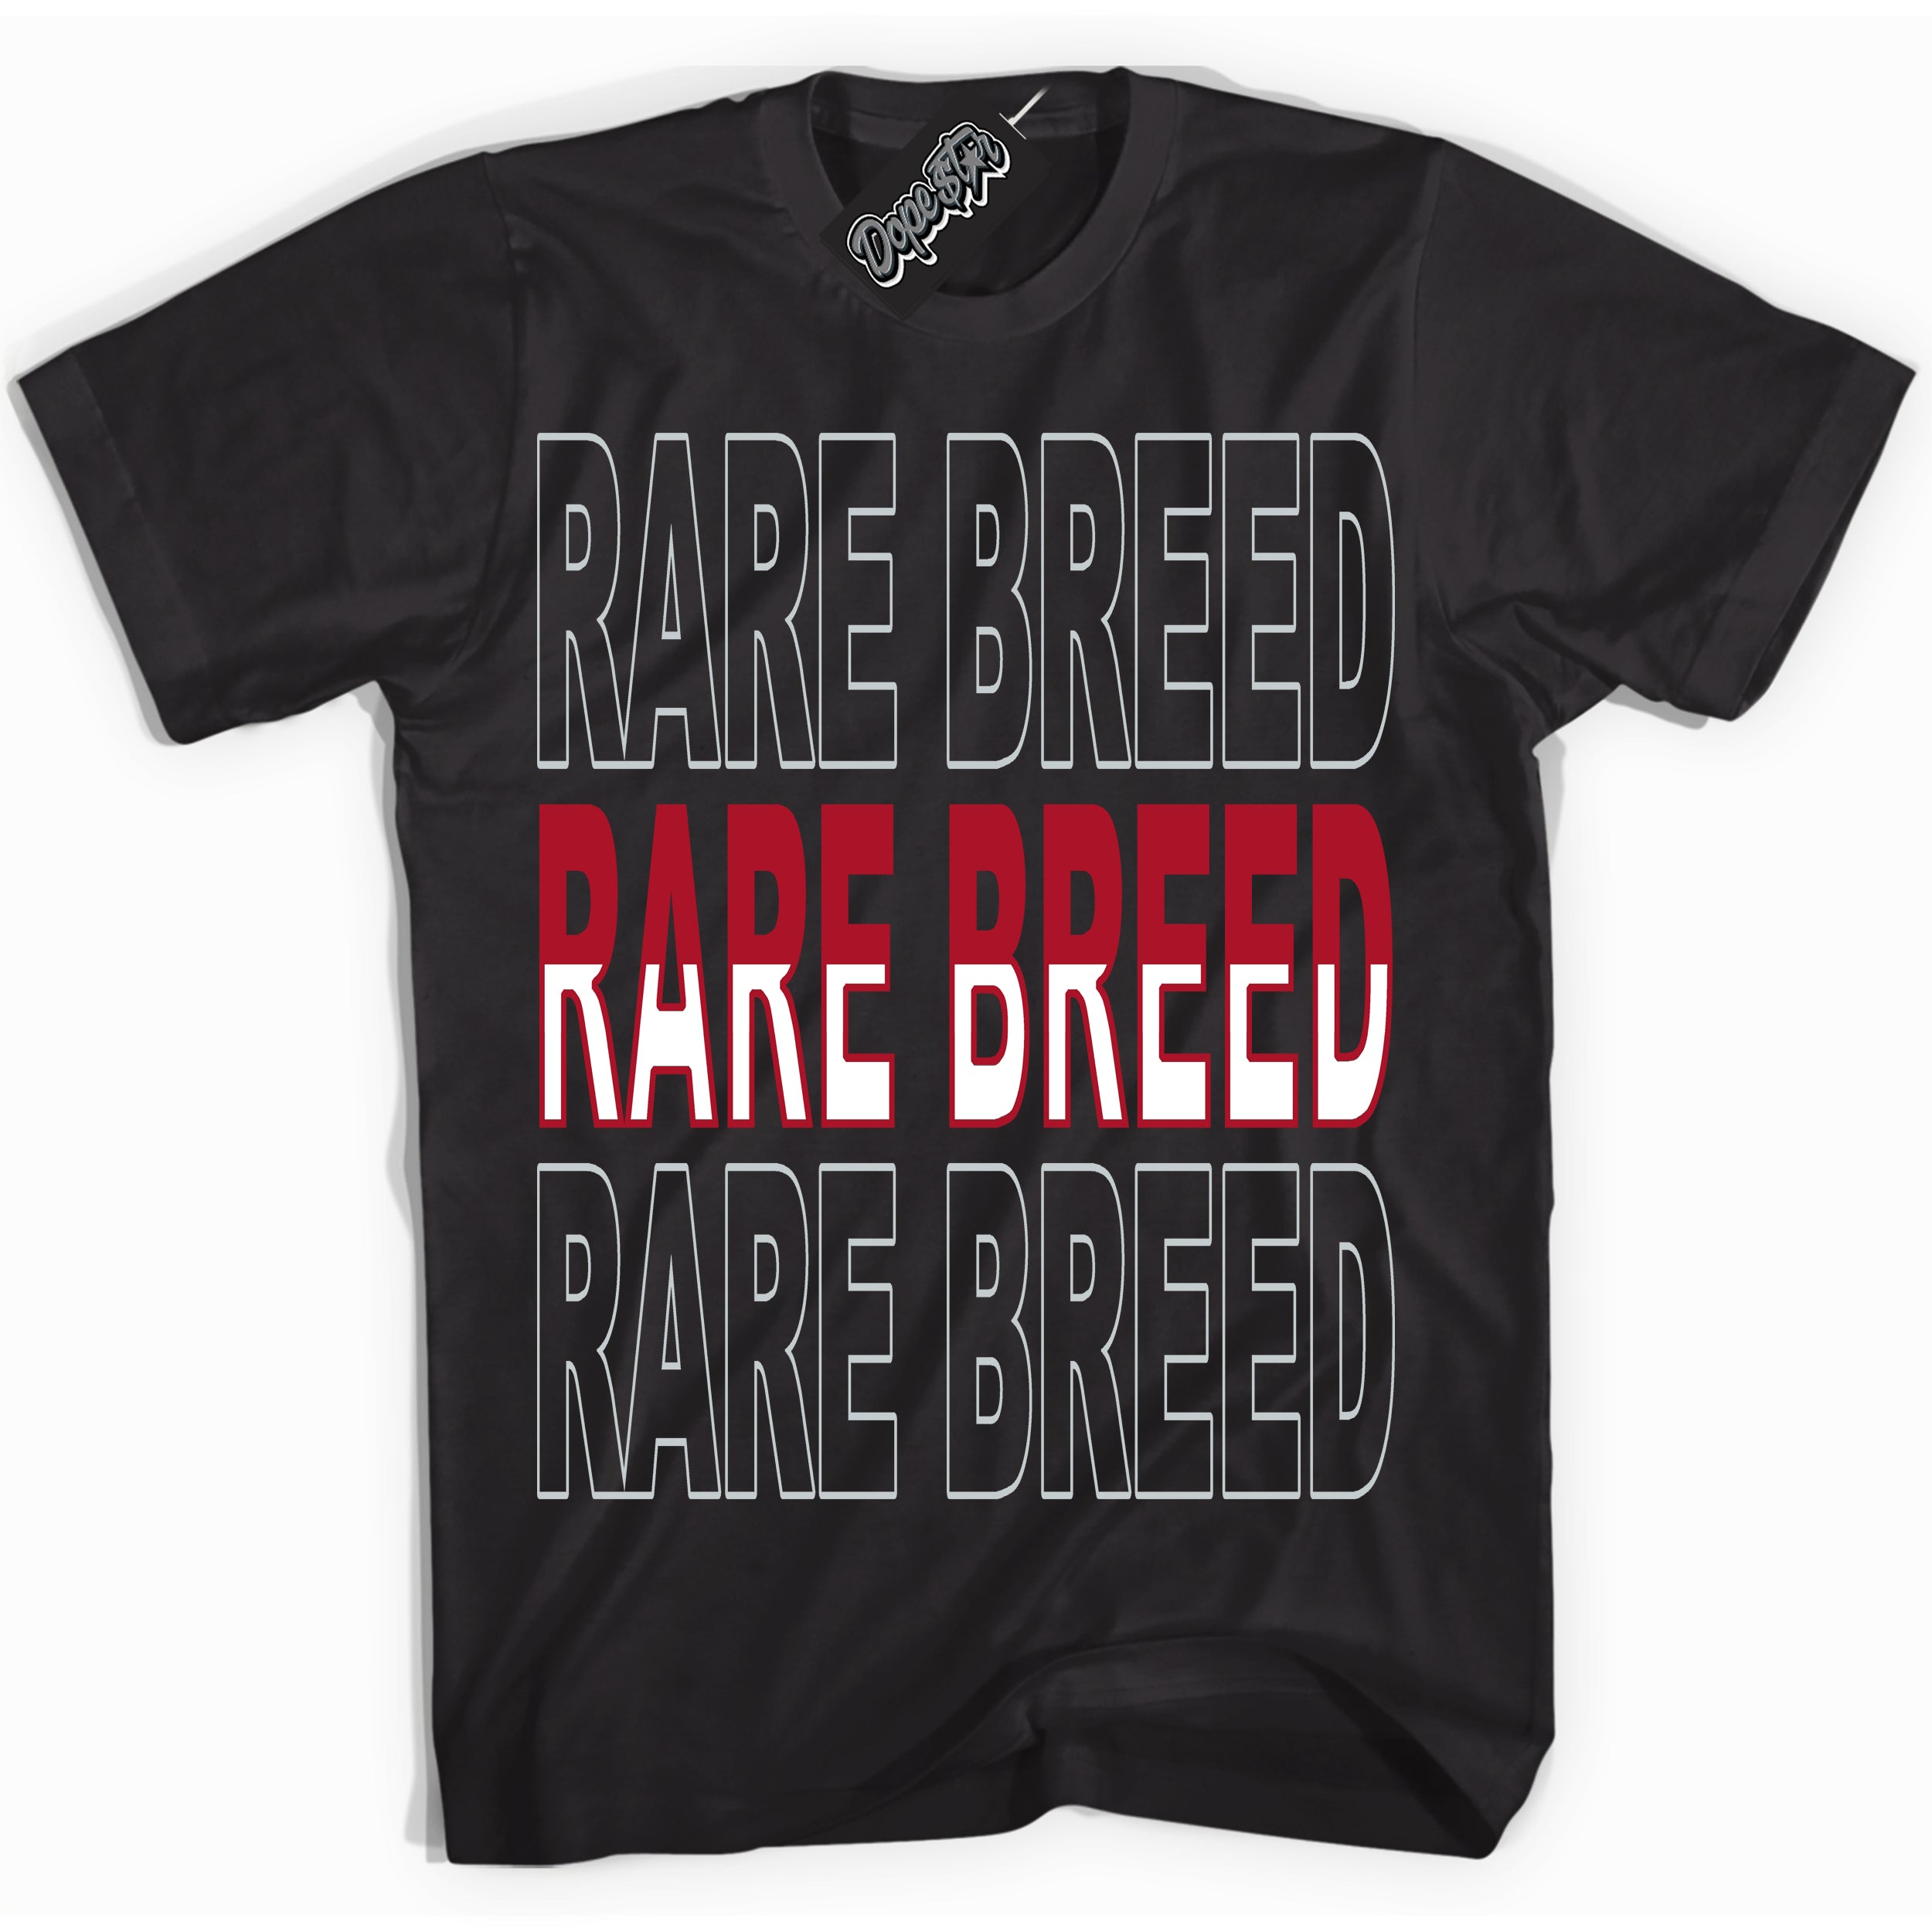 Cool Black Shirt with “ Rare Breed” design that perfectly matches Reverse Ultraman Sneakers.